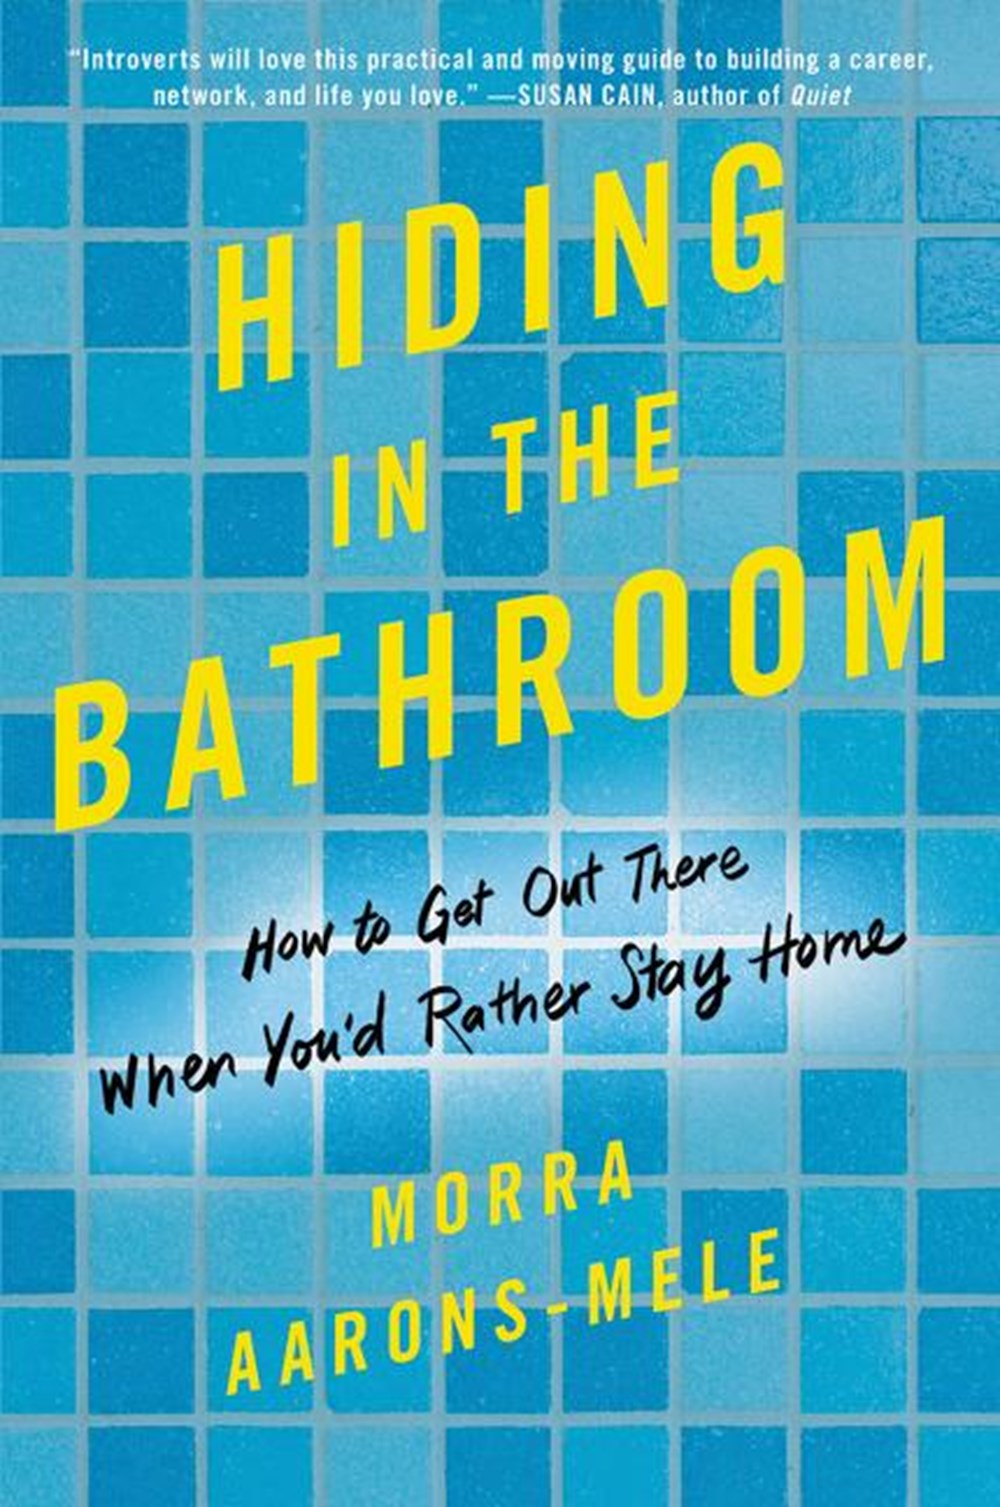 Hiding in the Bathroom An Introvert's Roadmap to Getting Out There (When You'd Rather Stay Home)